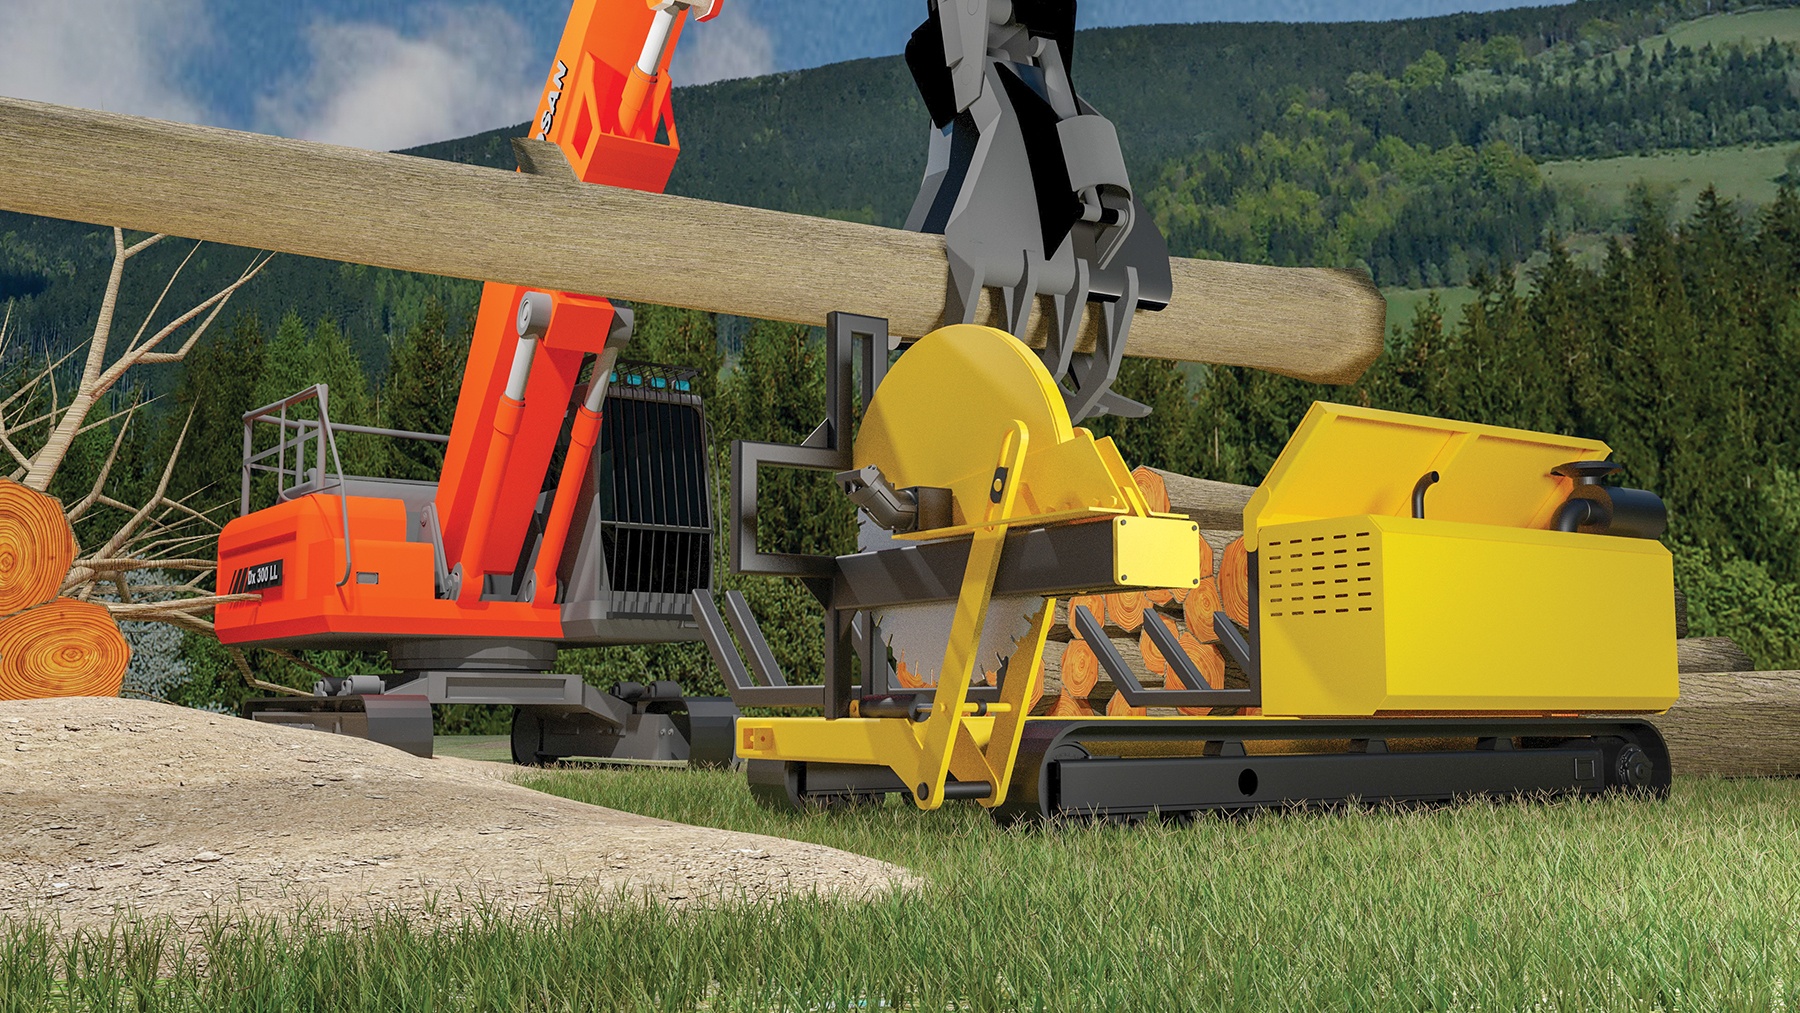 Logger, Engineer Roll Out New Remote-Controlled Tracked Slasher